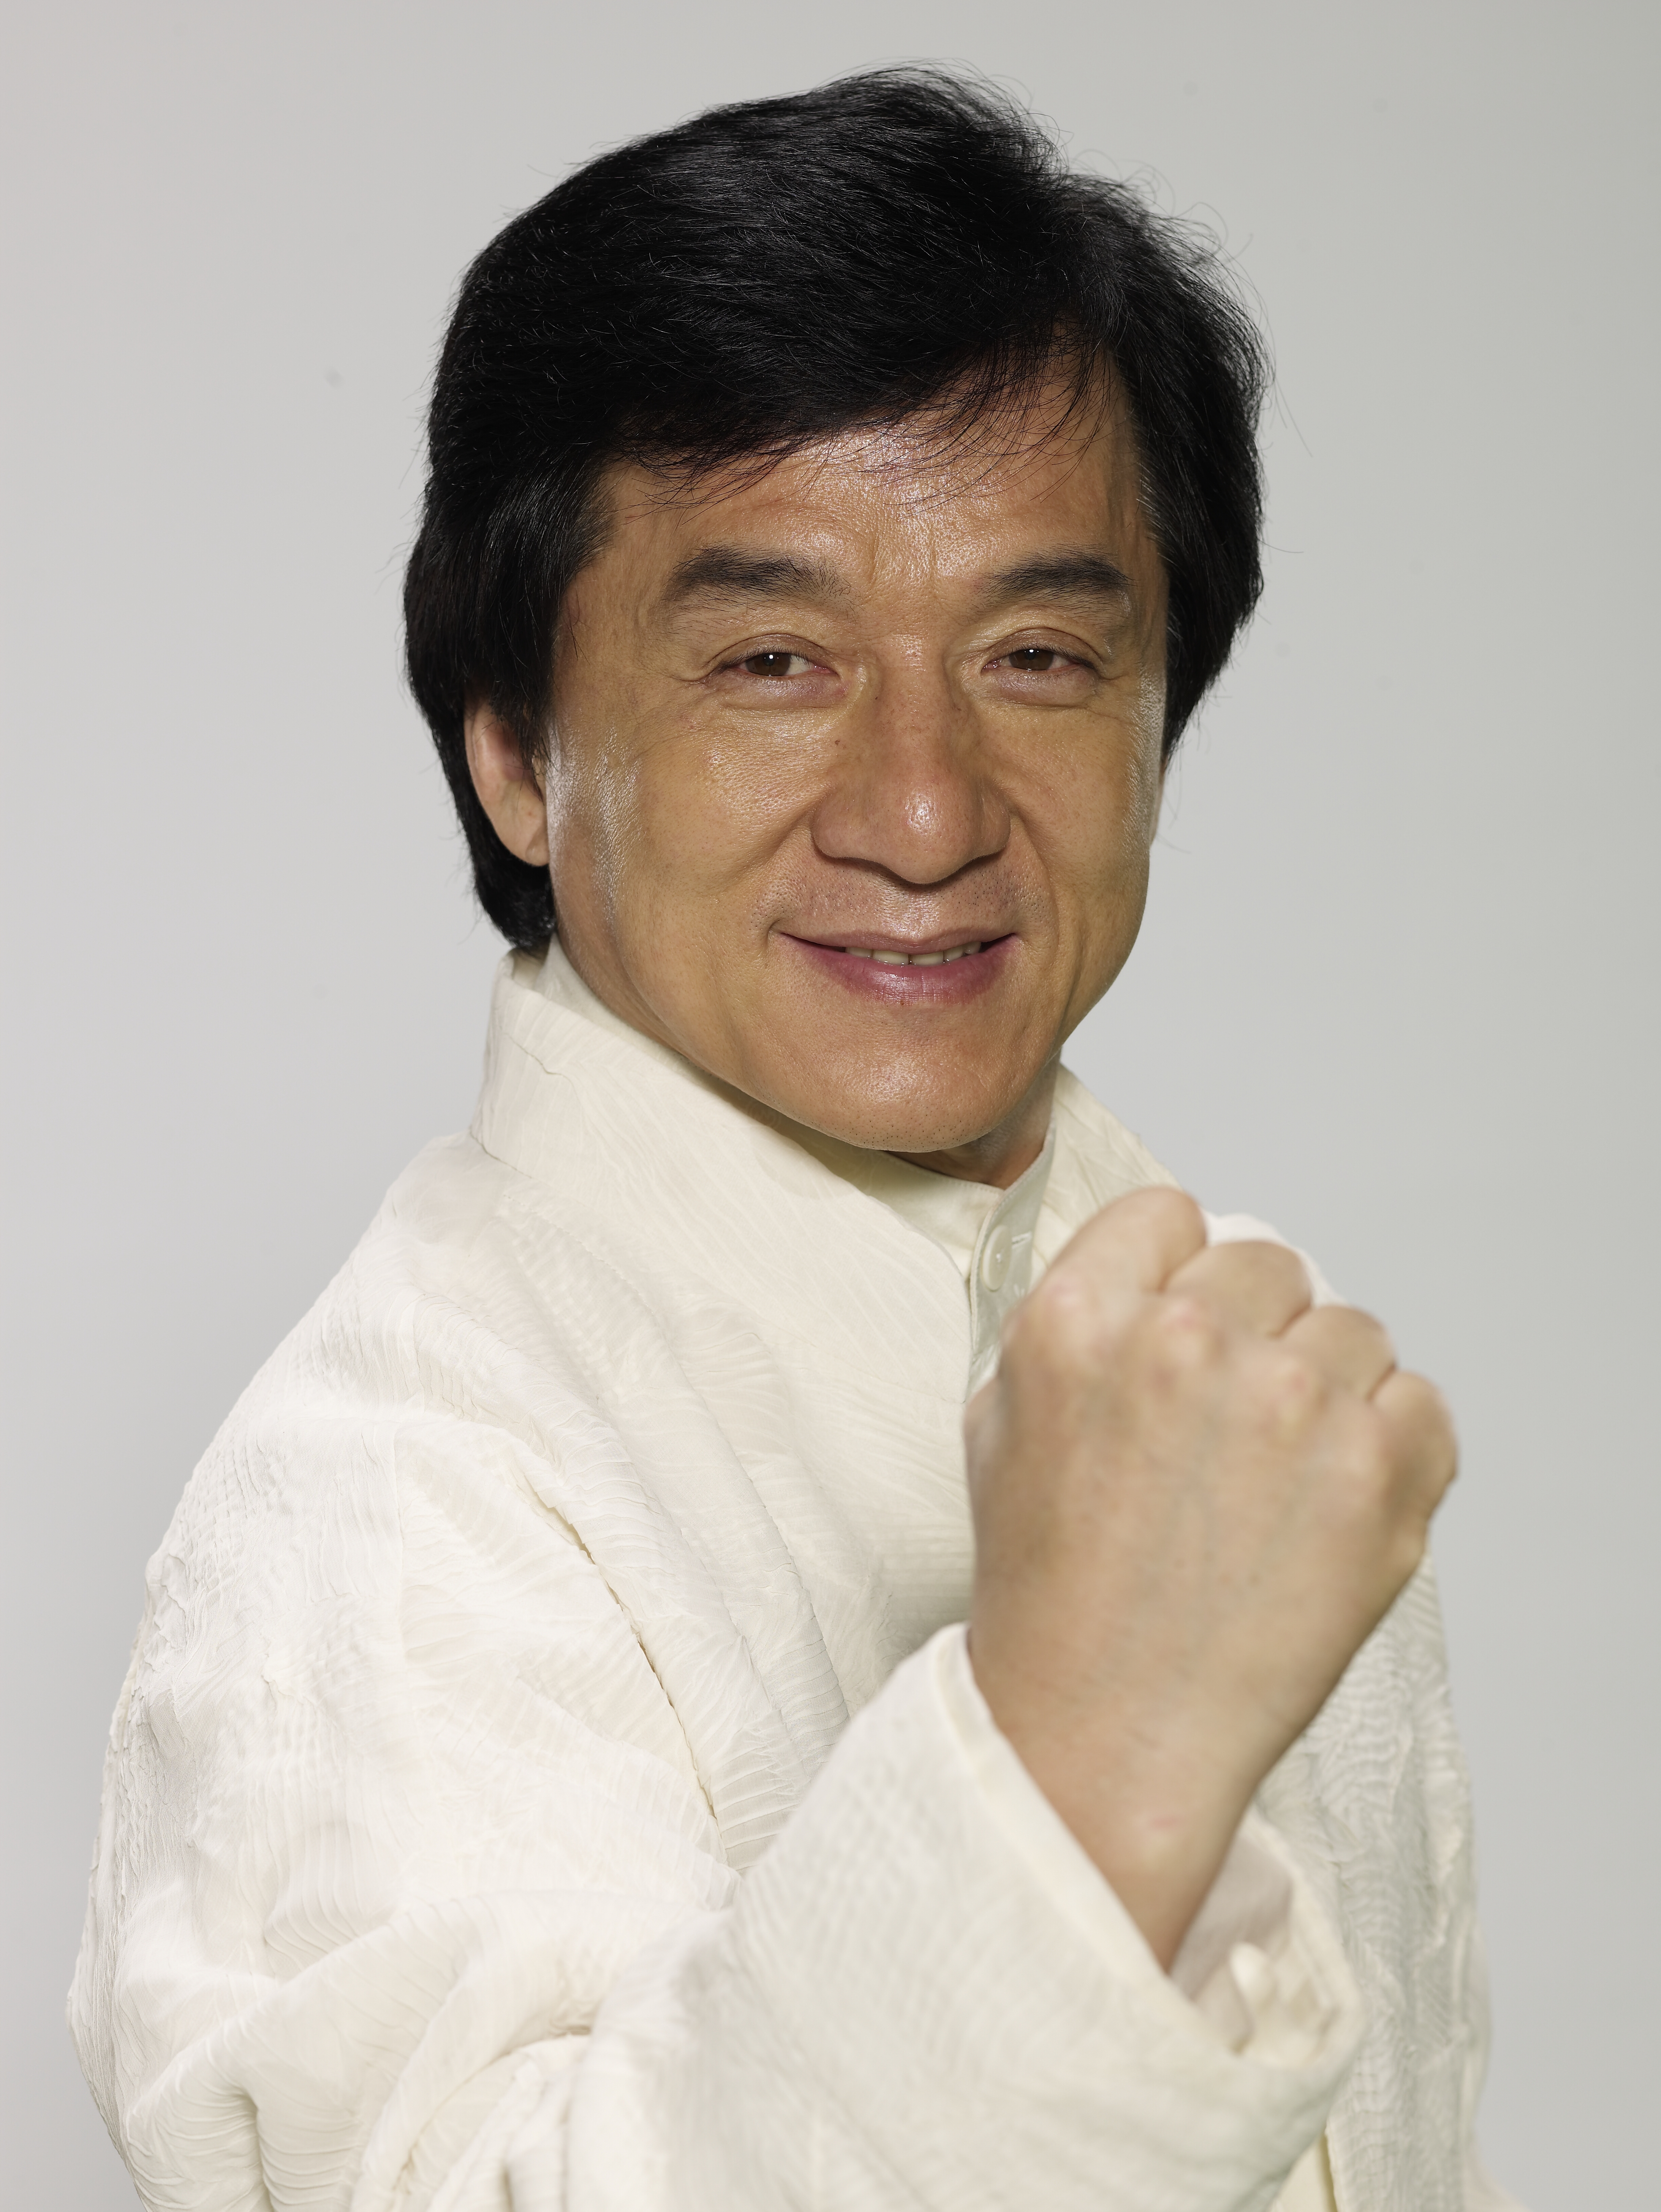 Index of /Looking for Jackie Chan/Still.